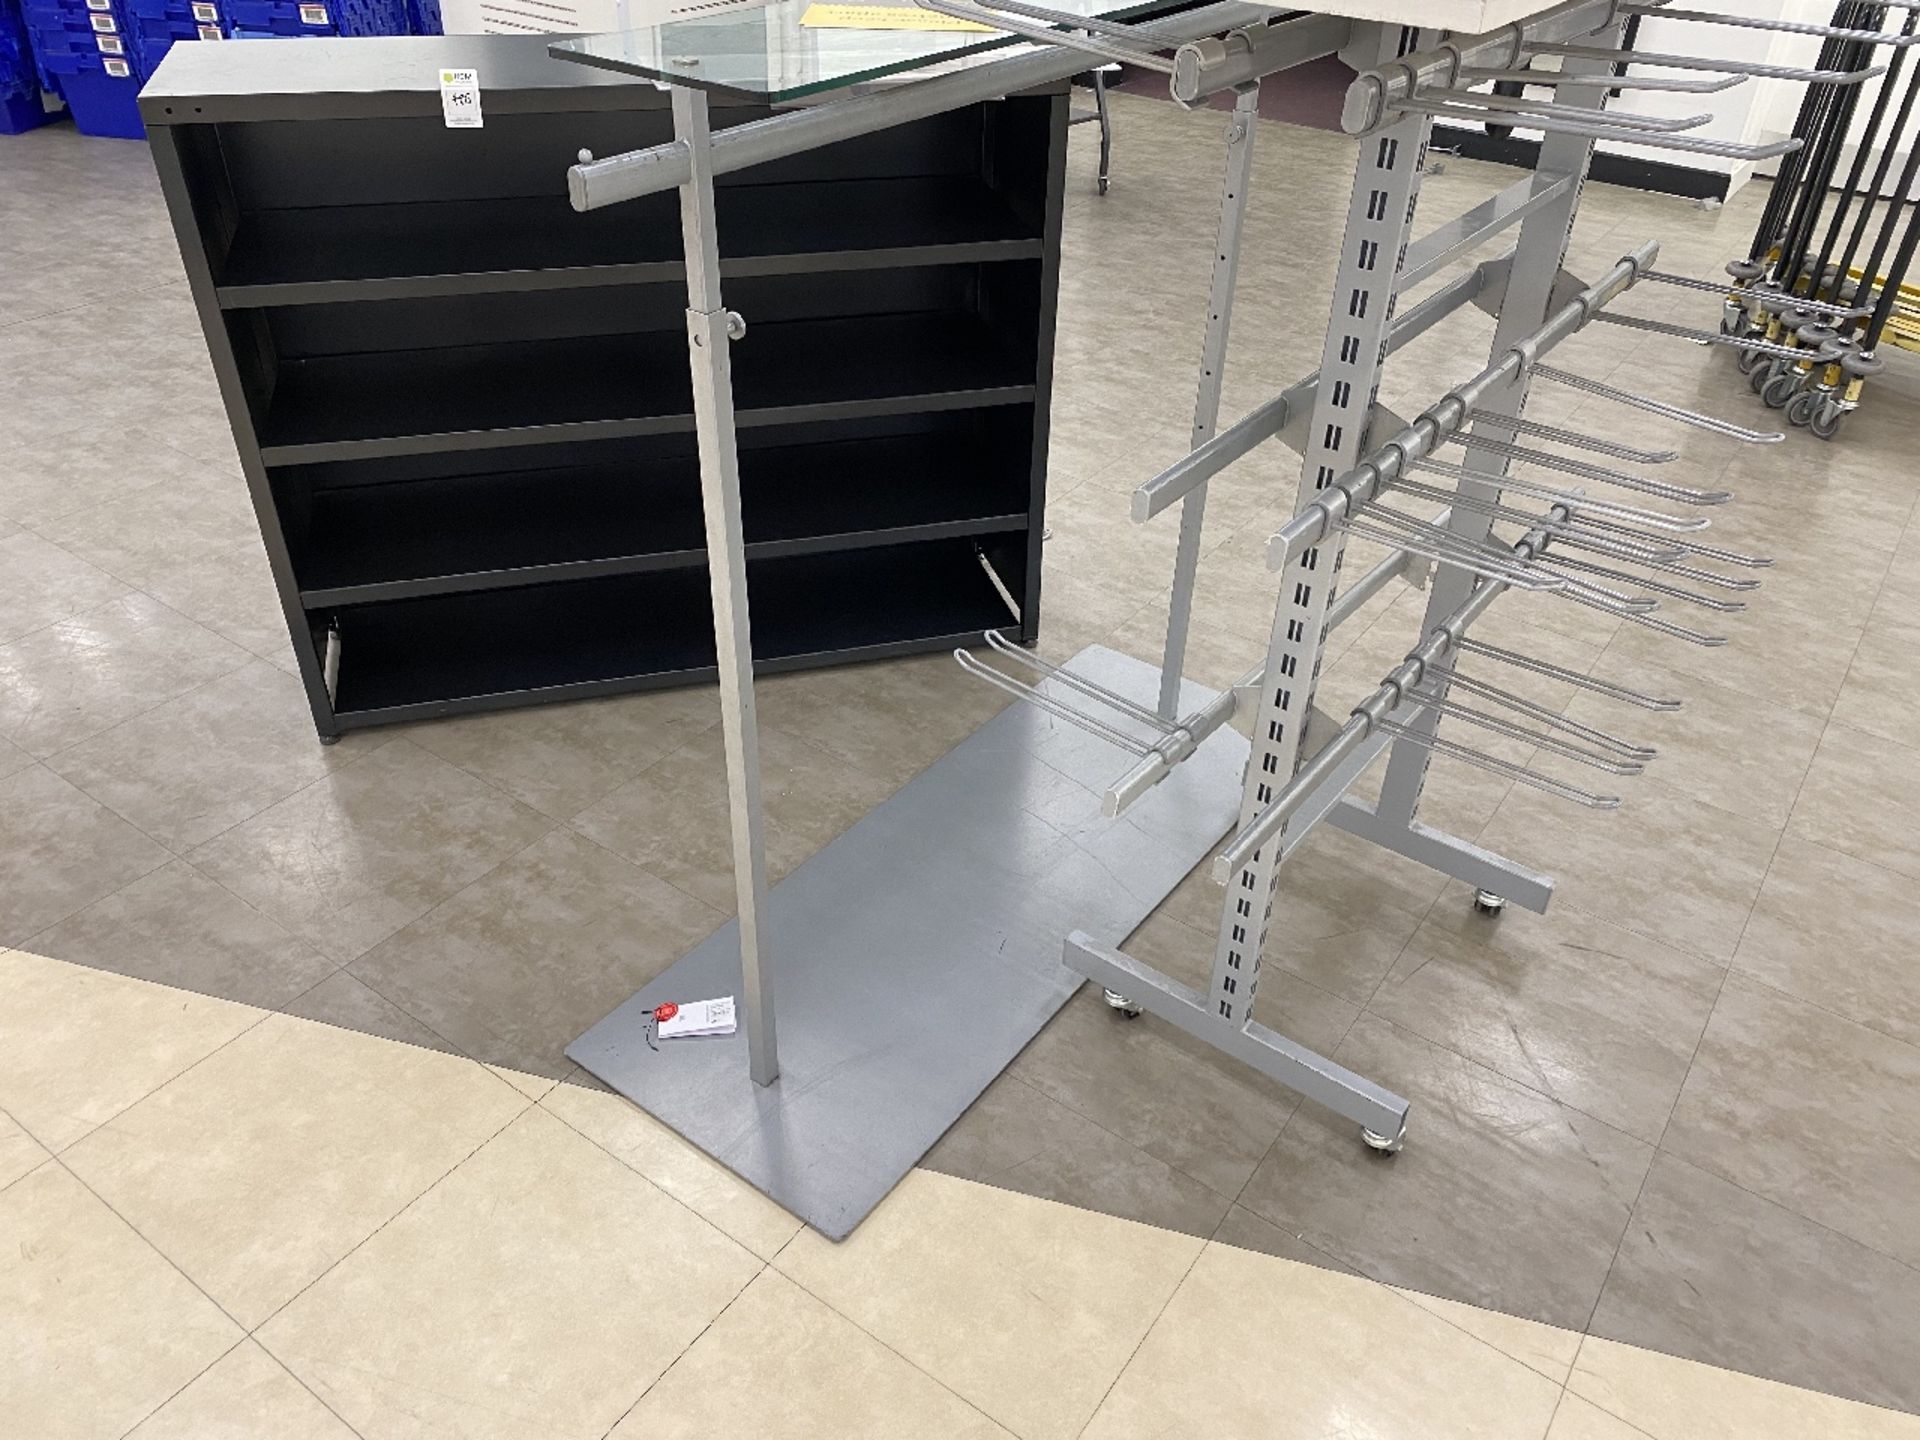 2 x clothes rail and 1 x storge unit - Image 2 of 2